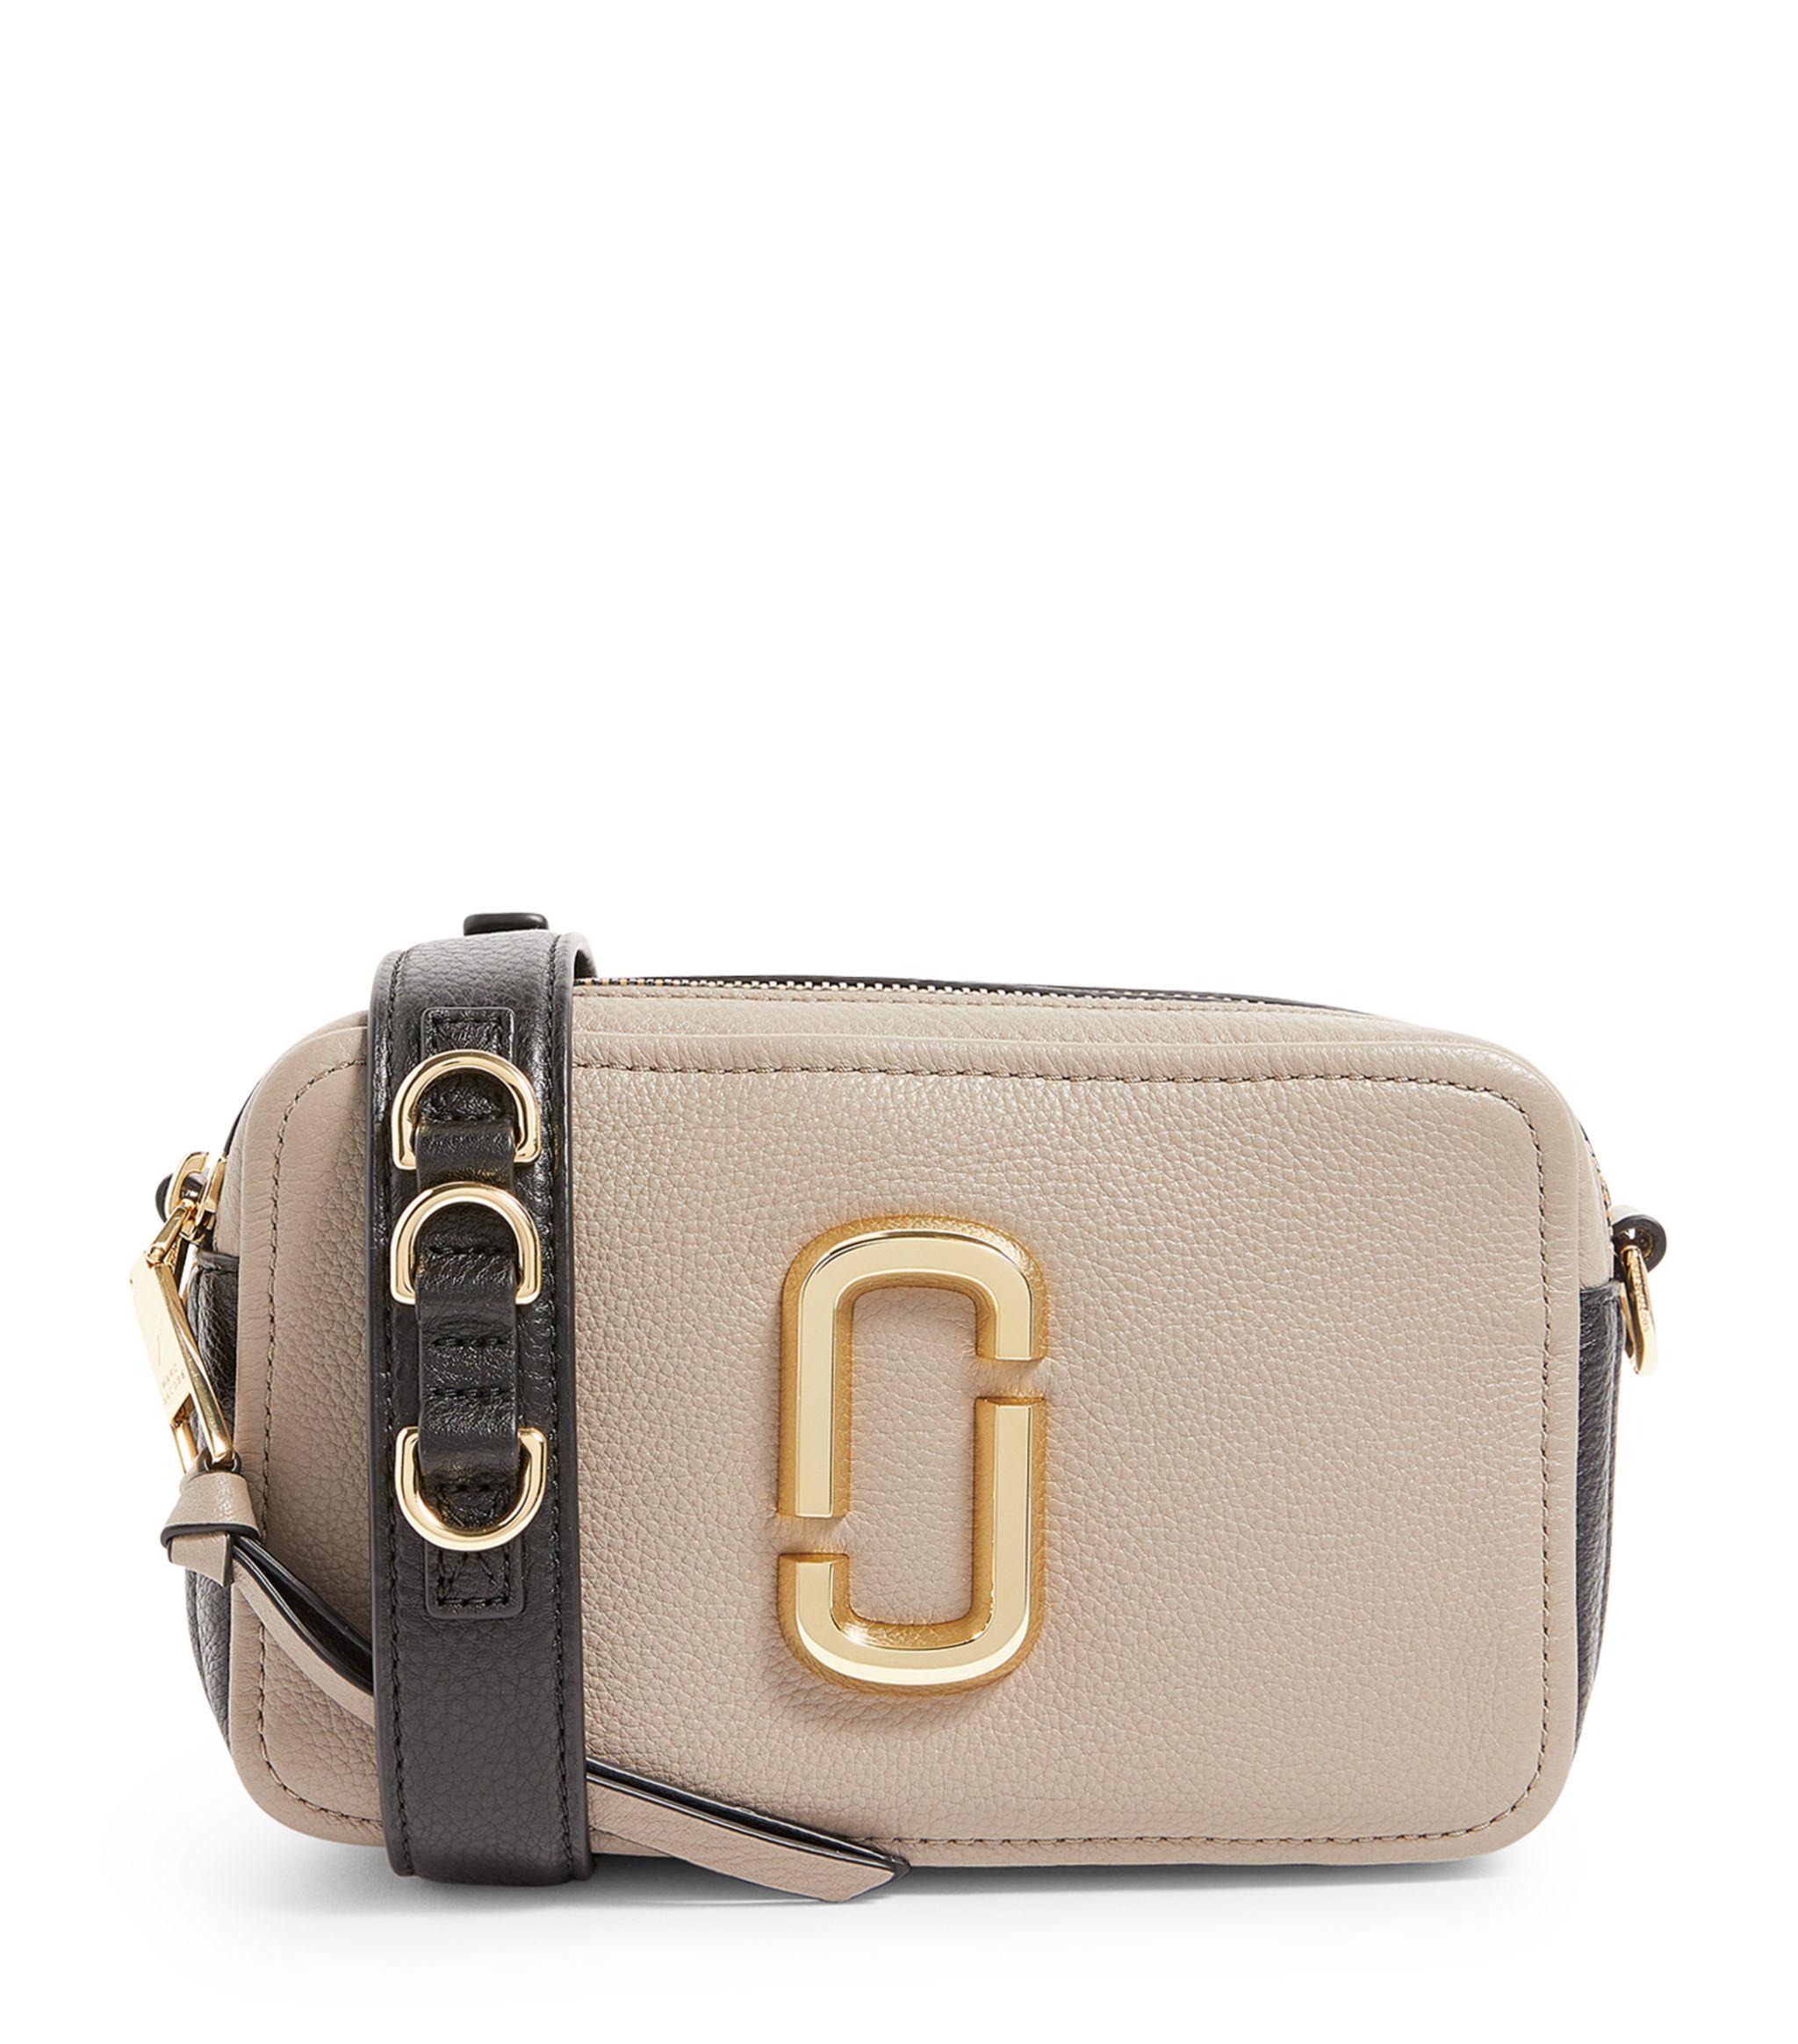 Marc Jacobs The Leather Softshot Cross-body Bag in Gray - Lyst